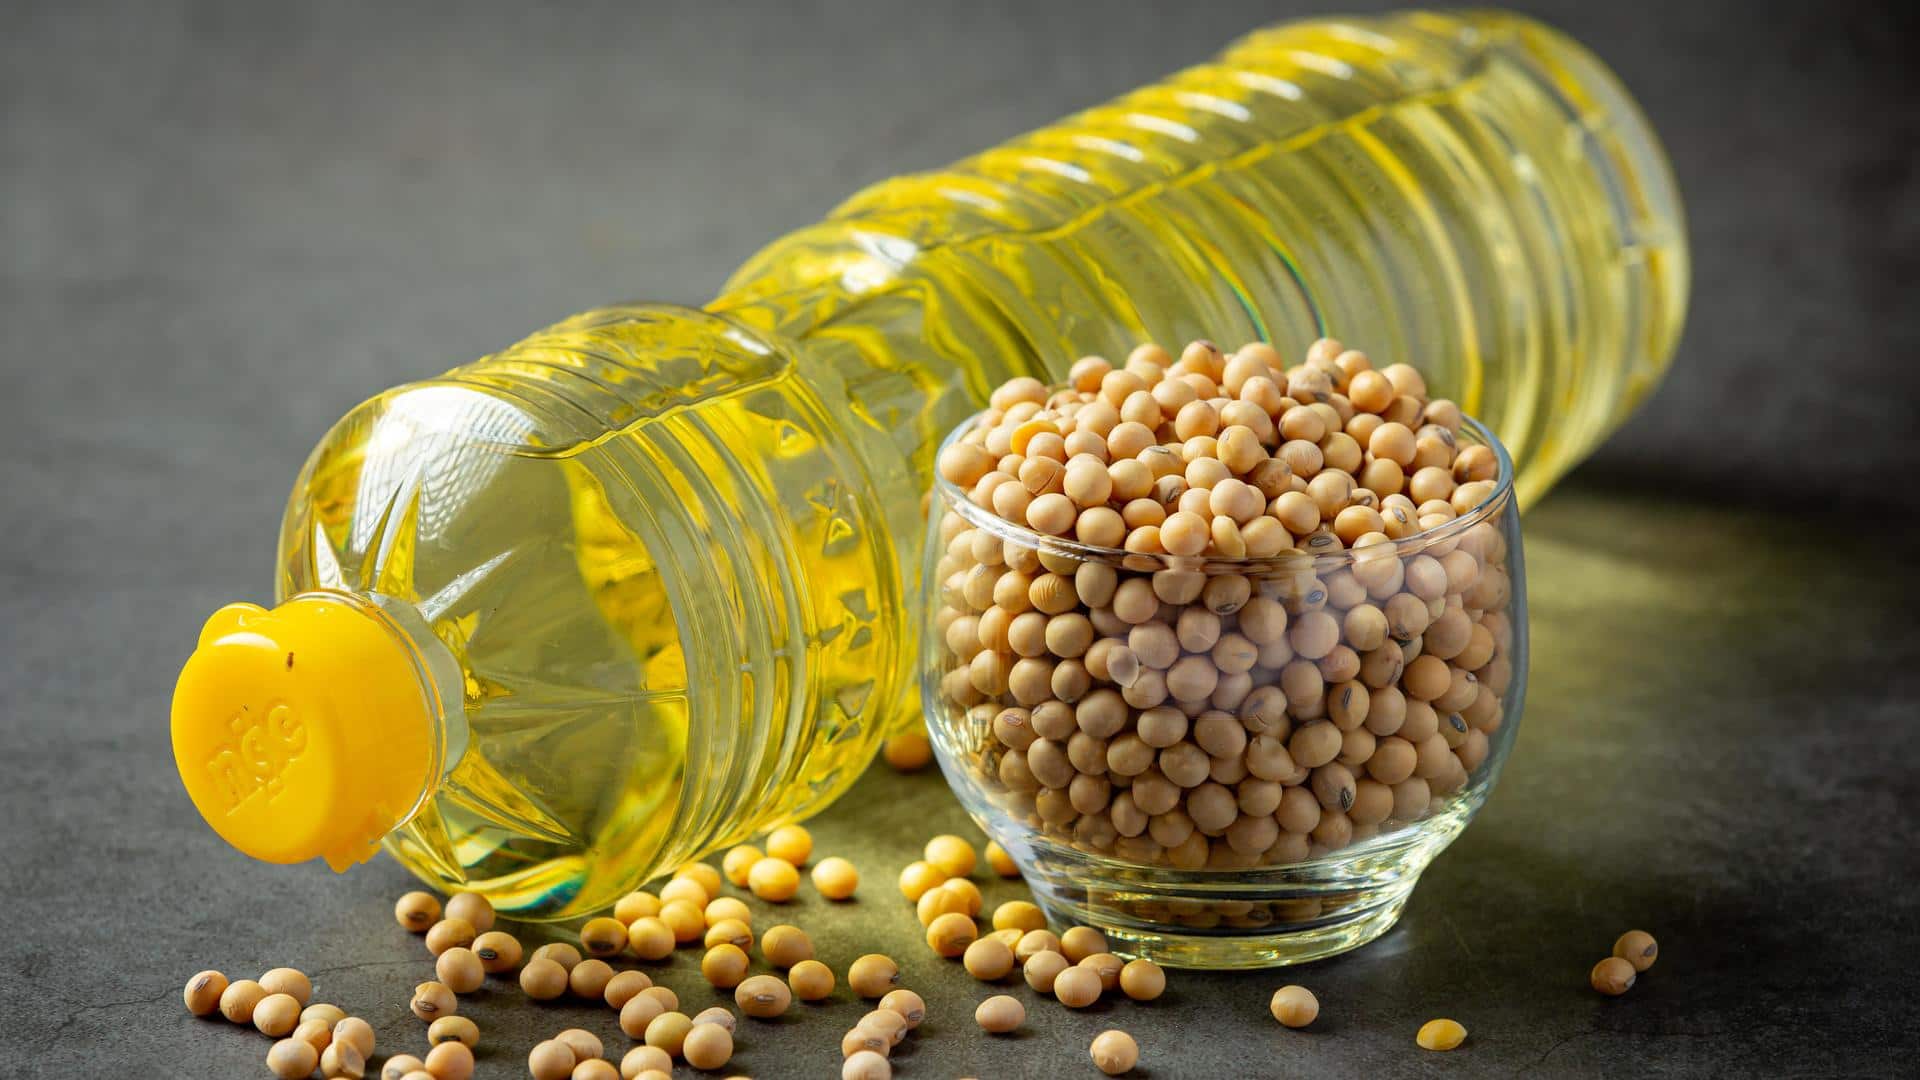 Did you know these awesome health benefits of soybean oil